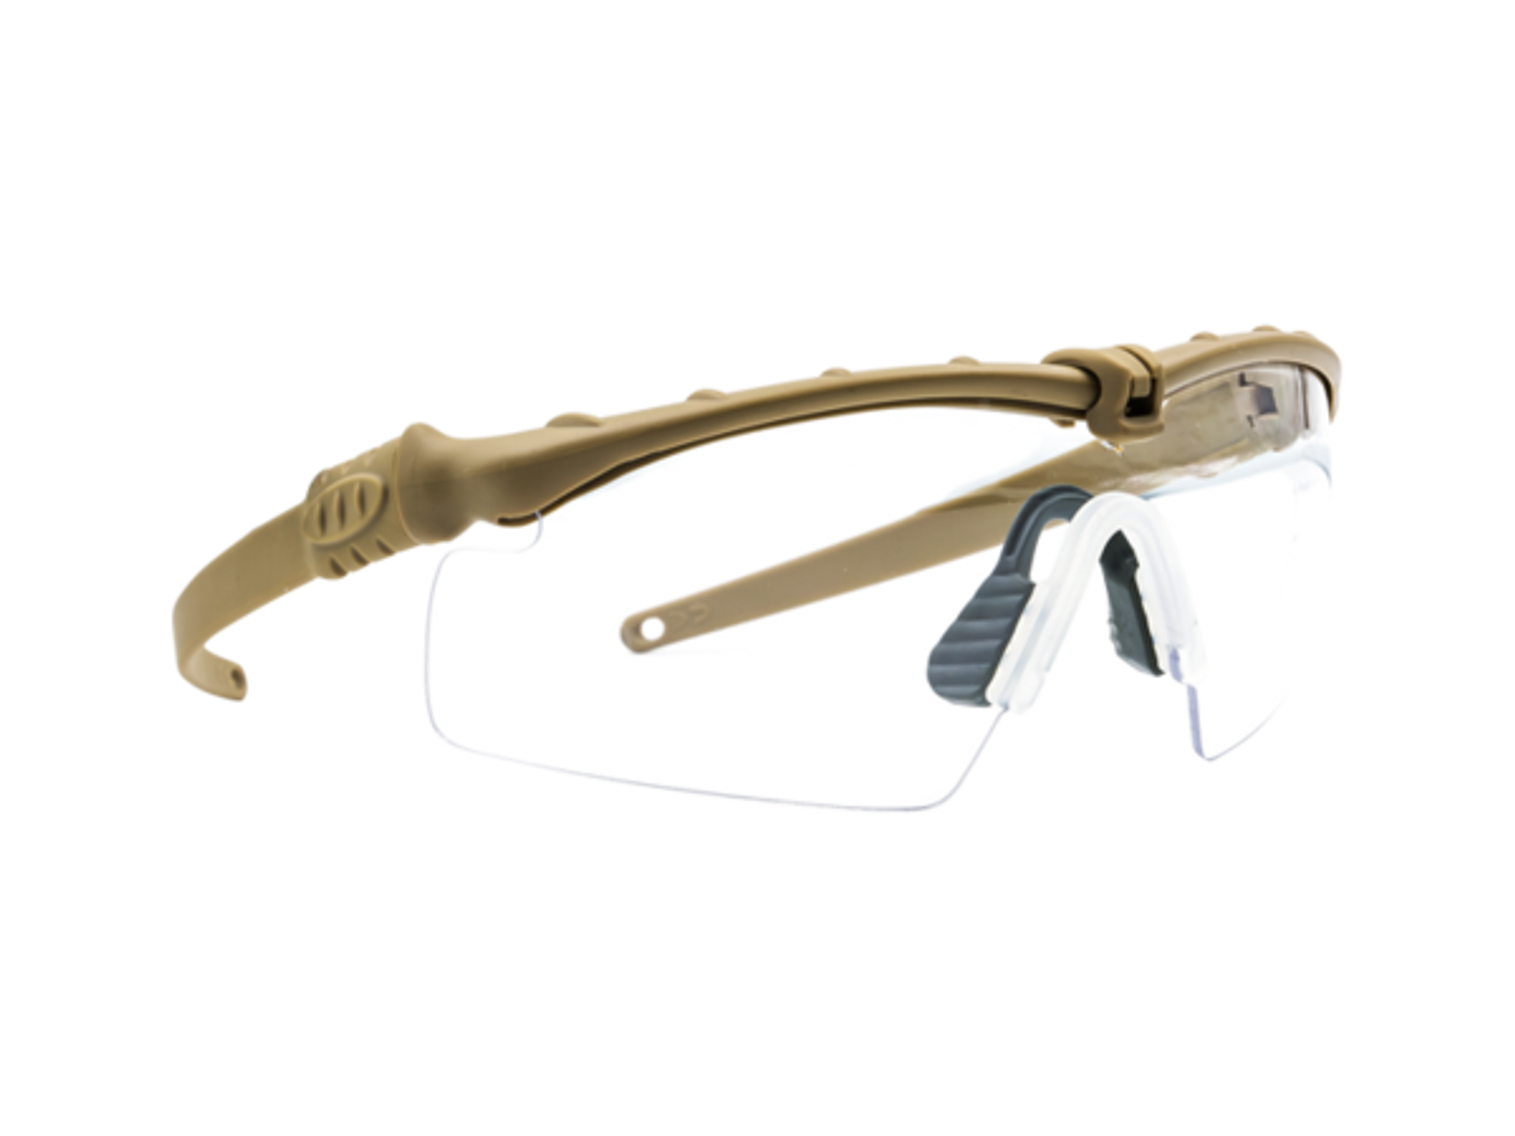 Bravo Airsoft Tactical Eye Pro with Clear Lens - Tan Frame